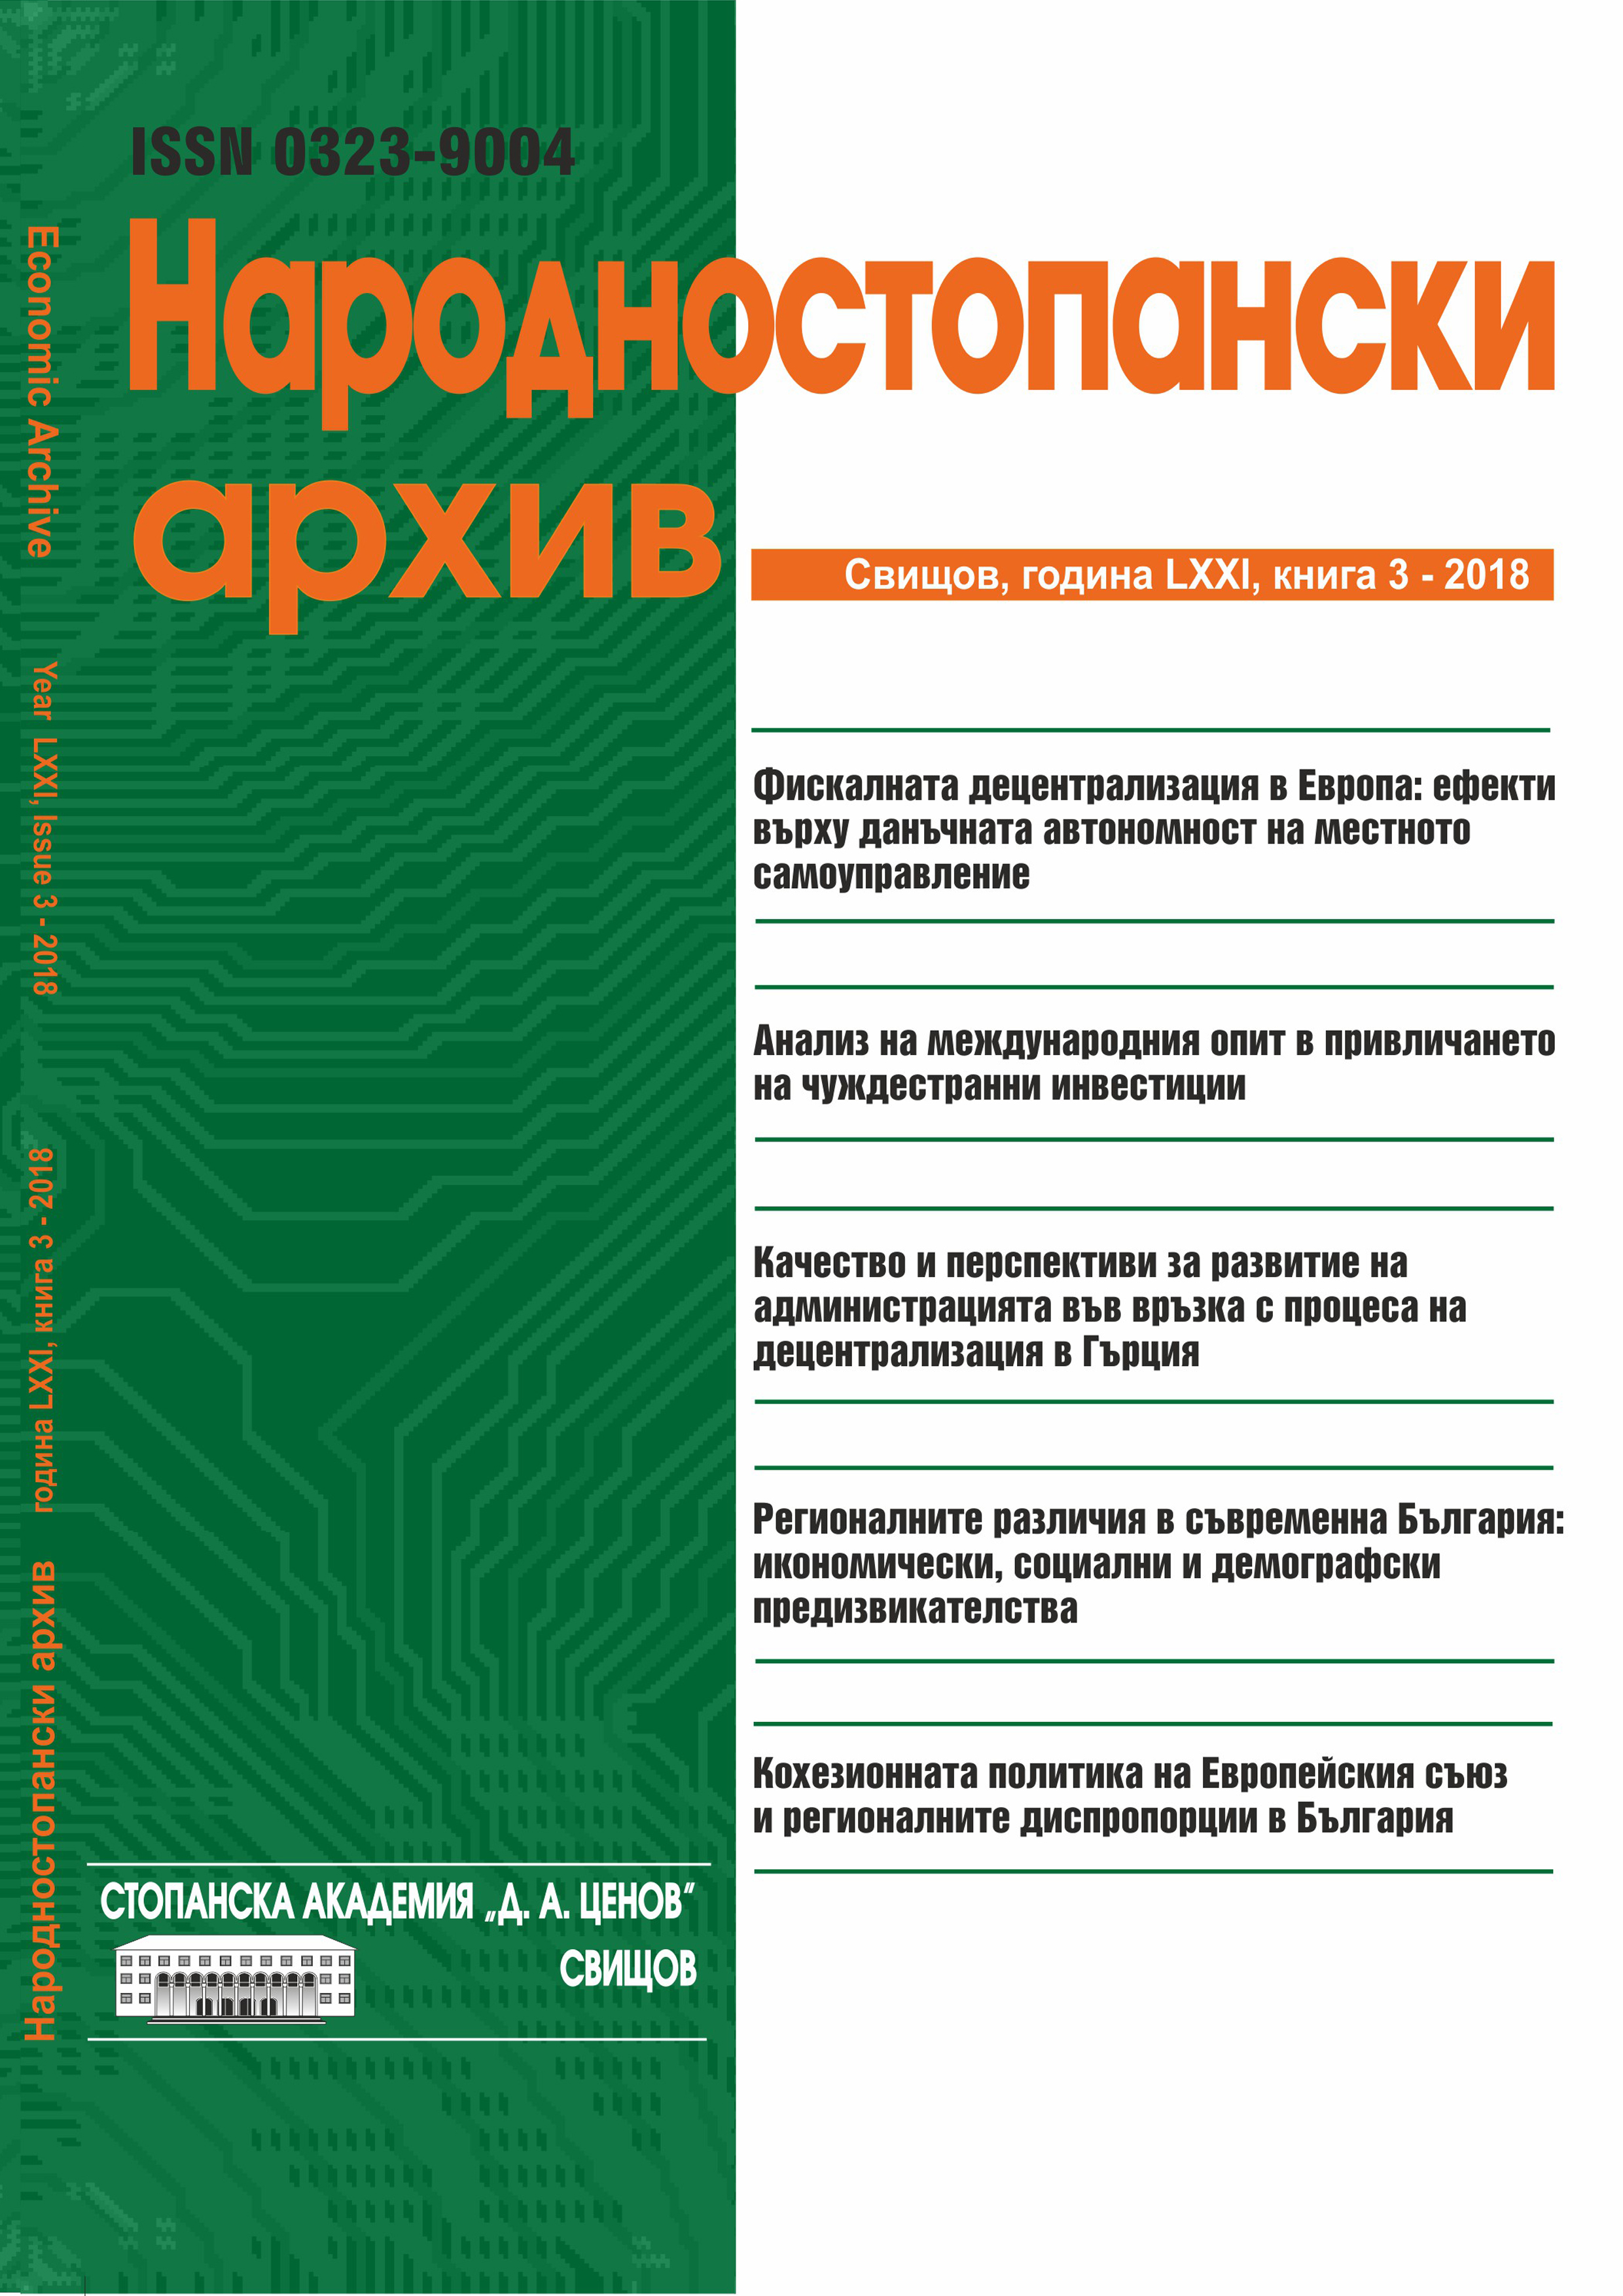 QUALITY AND PERSPECTIVES FOR DEVELOPMENT OF THE ADMINISTRATION IN THE CONTEXT OF THE PROCESS OF DECENTRALIZATION IN GREECE Cover Image